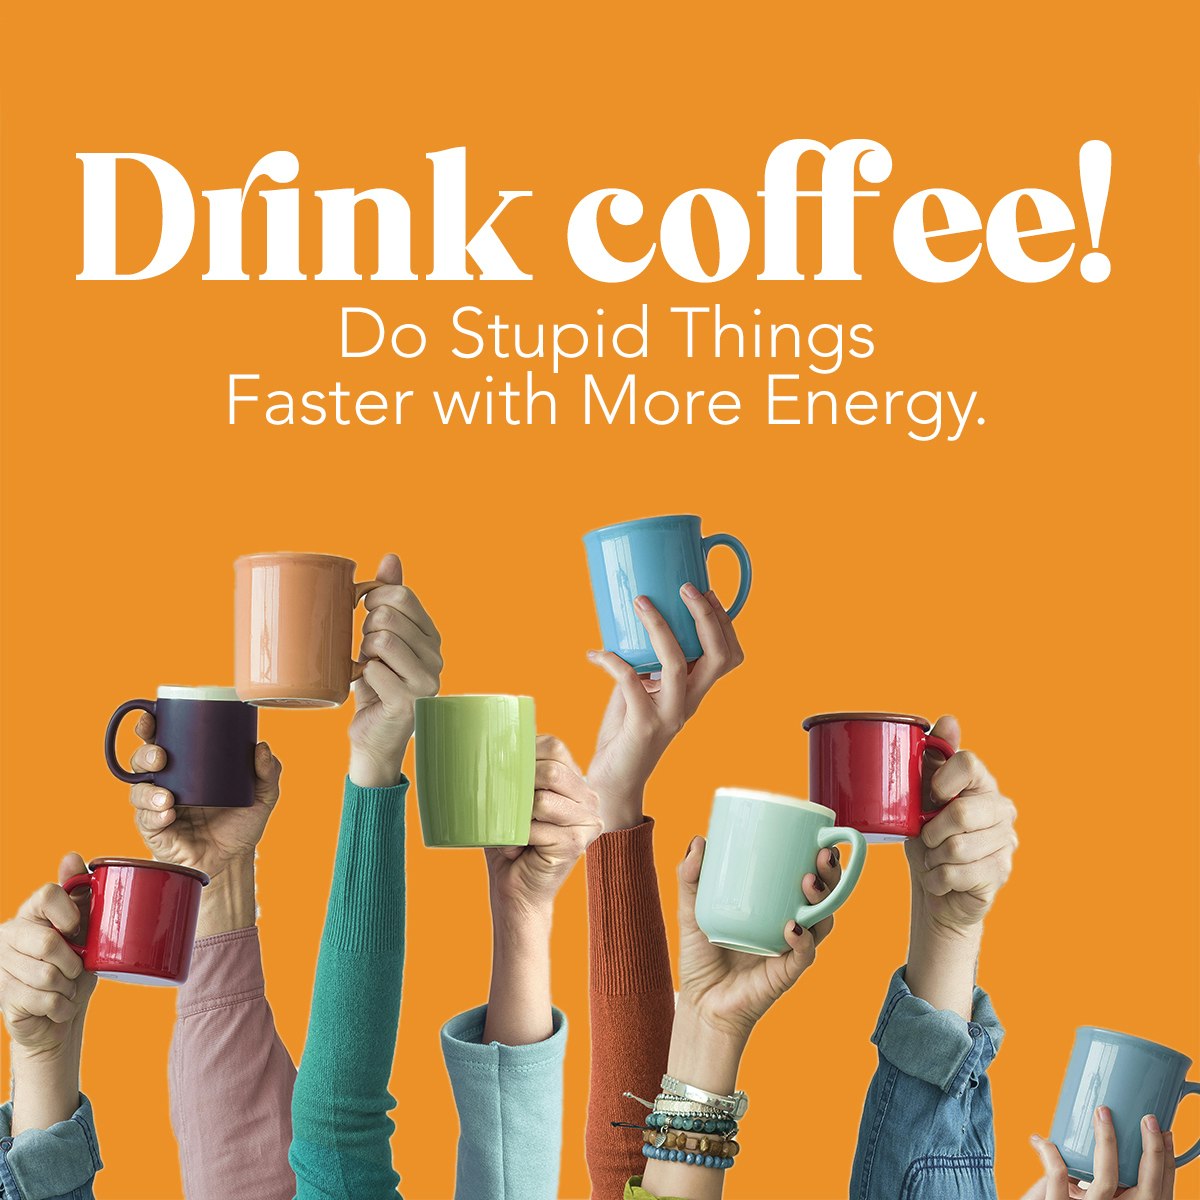 Happy Saturday! Now you'll have more energy to get things done! #DrinkCoffee #EnergyForTheDay #FasterFaster #AvonRep #pamsavonshop avon.com/repstore/pamwa…